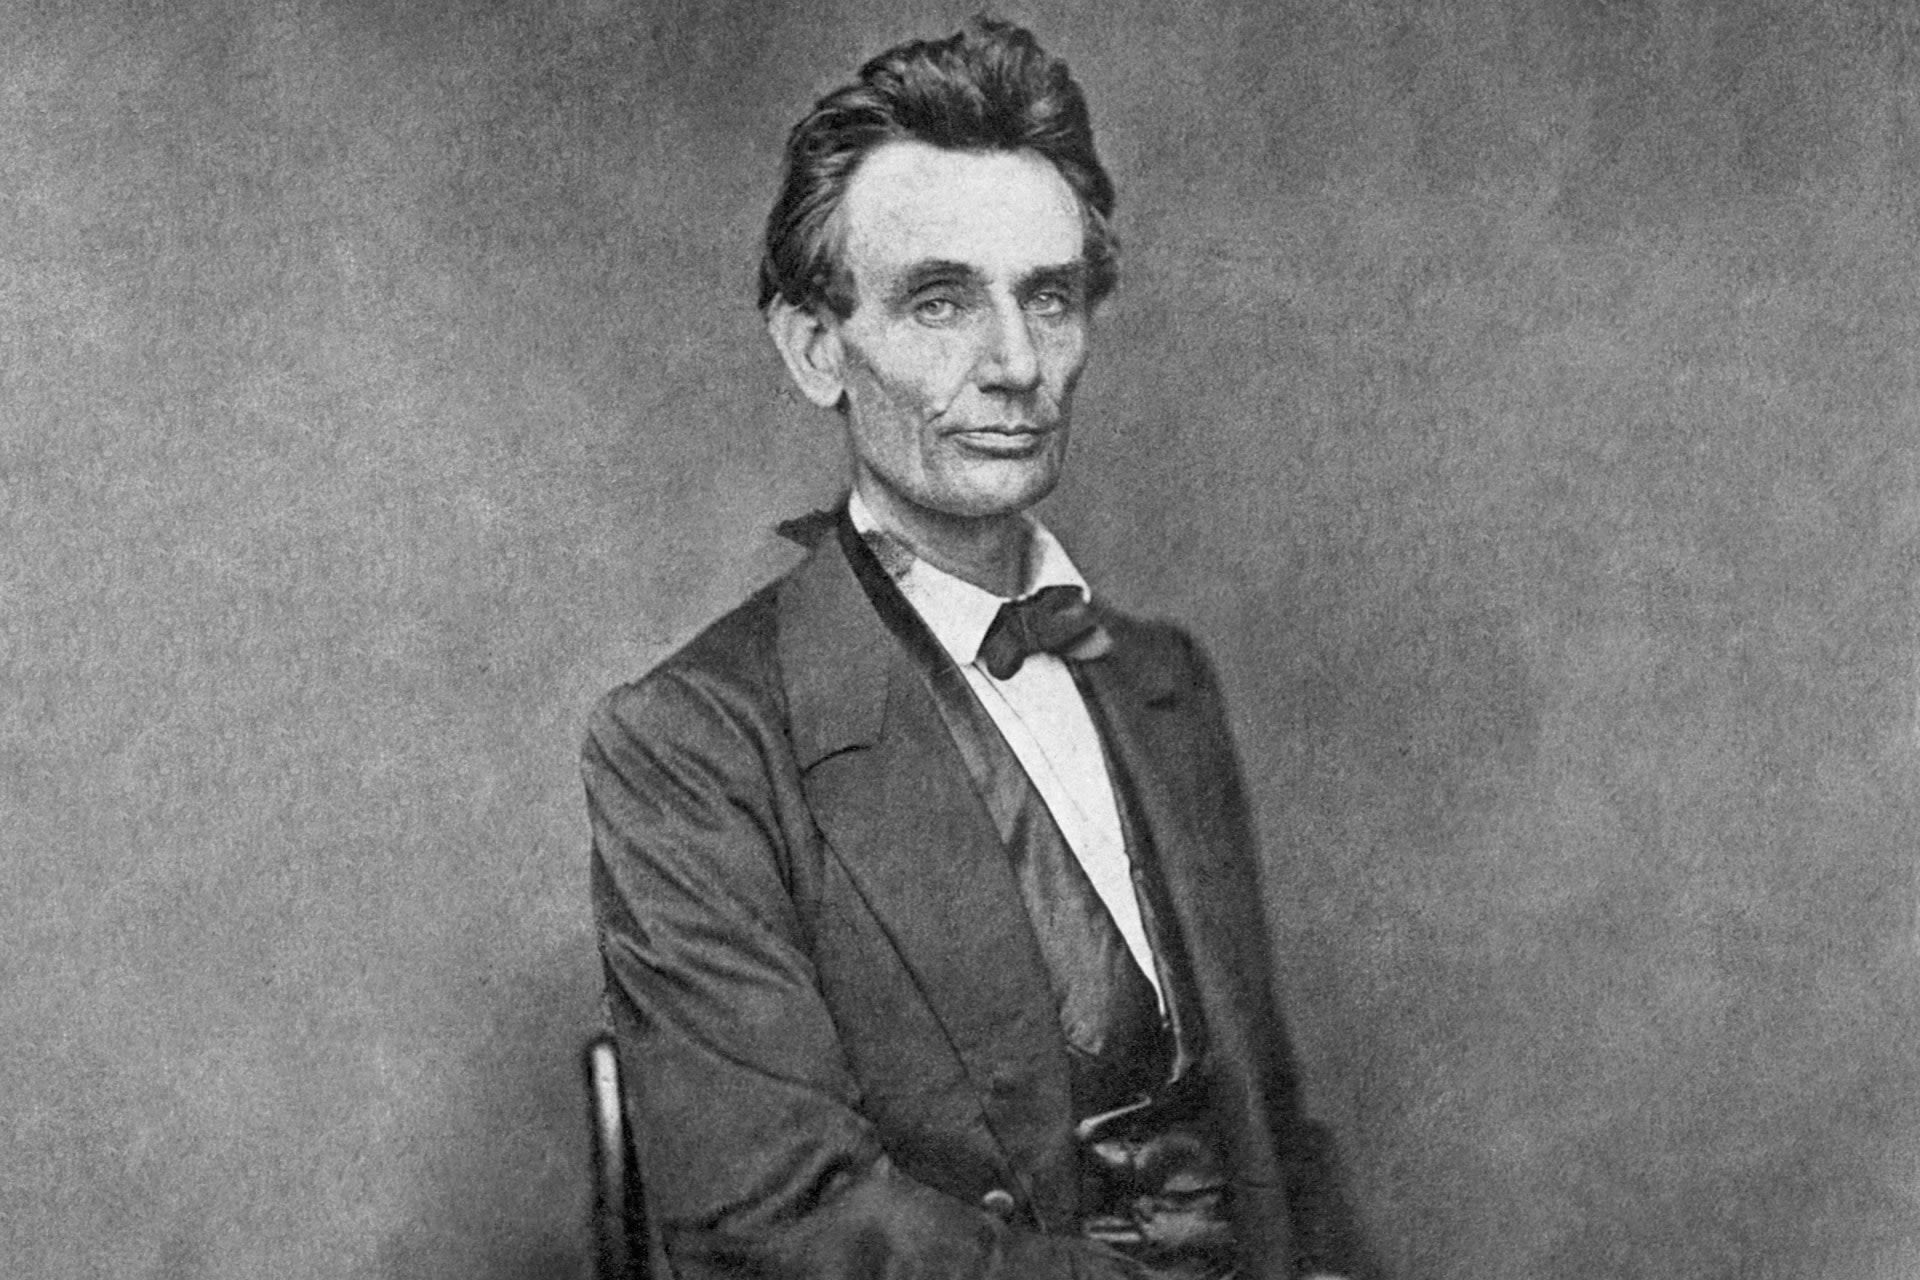 A New Documentary Will Explore Abraham Lincoln's Romantic Relationships With Men